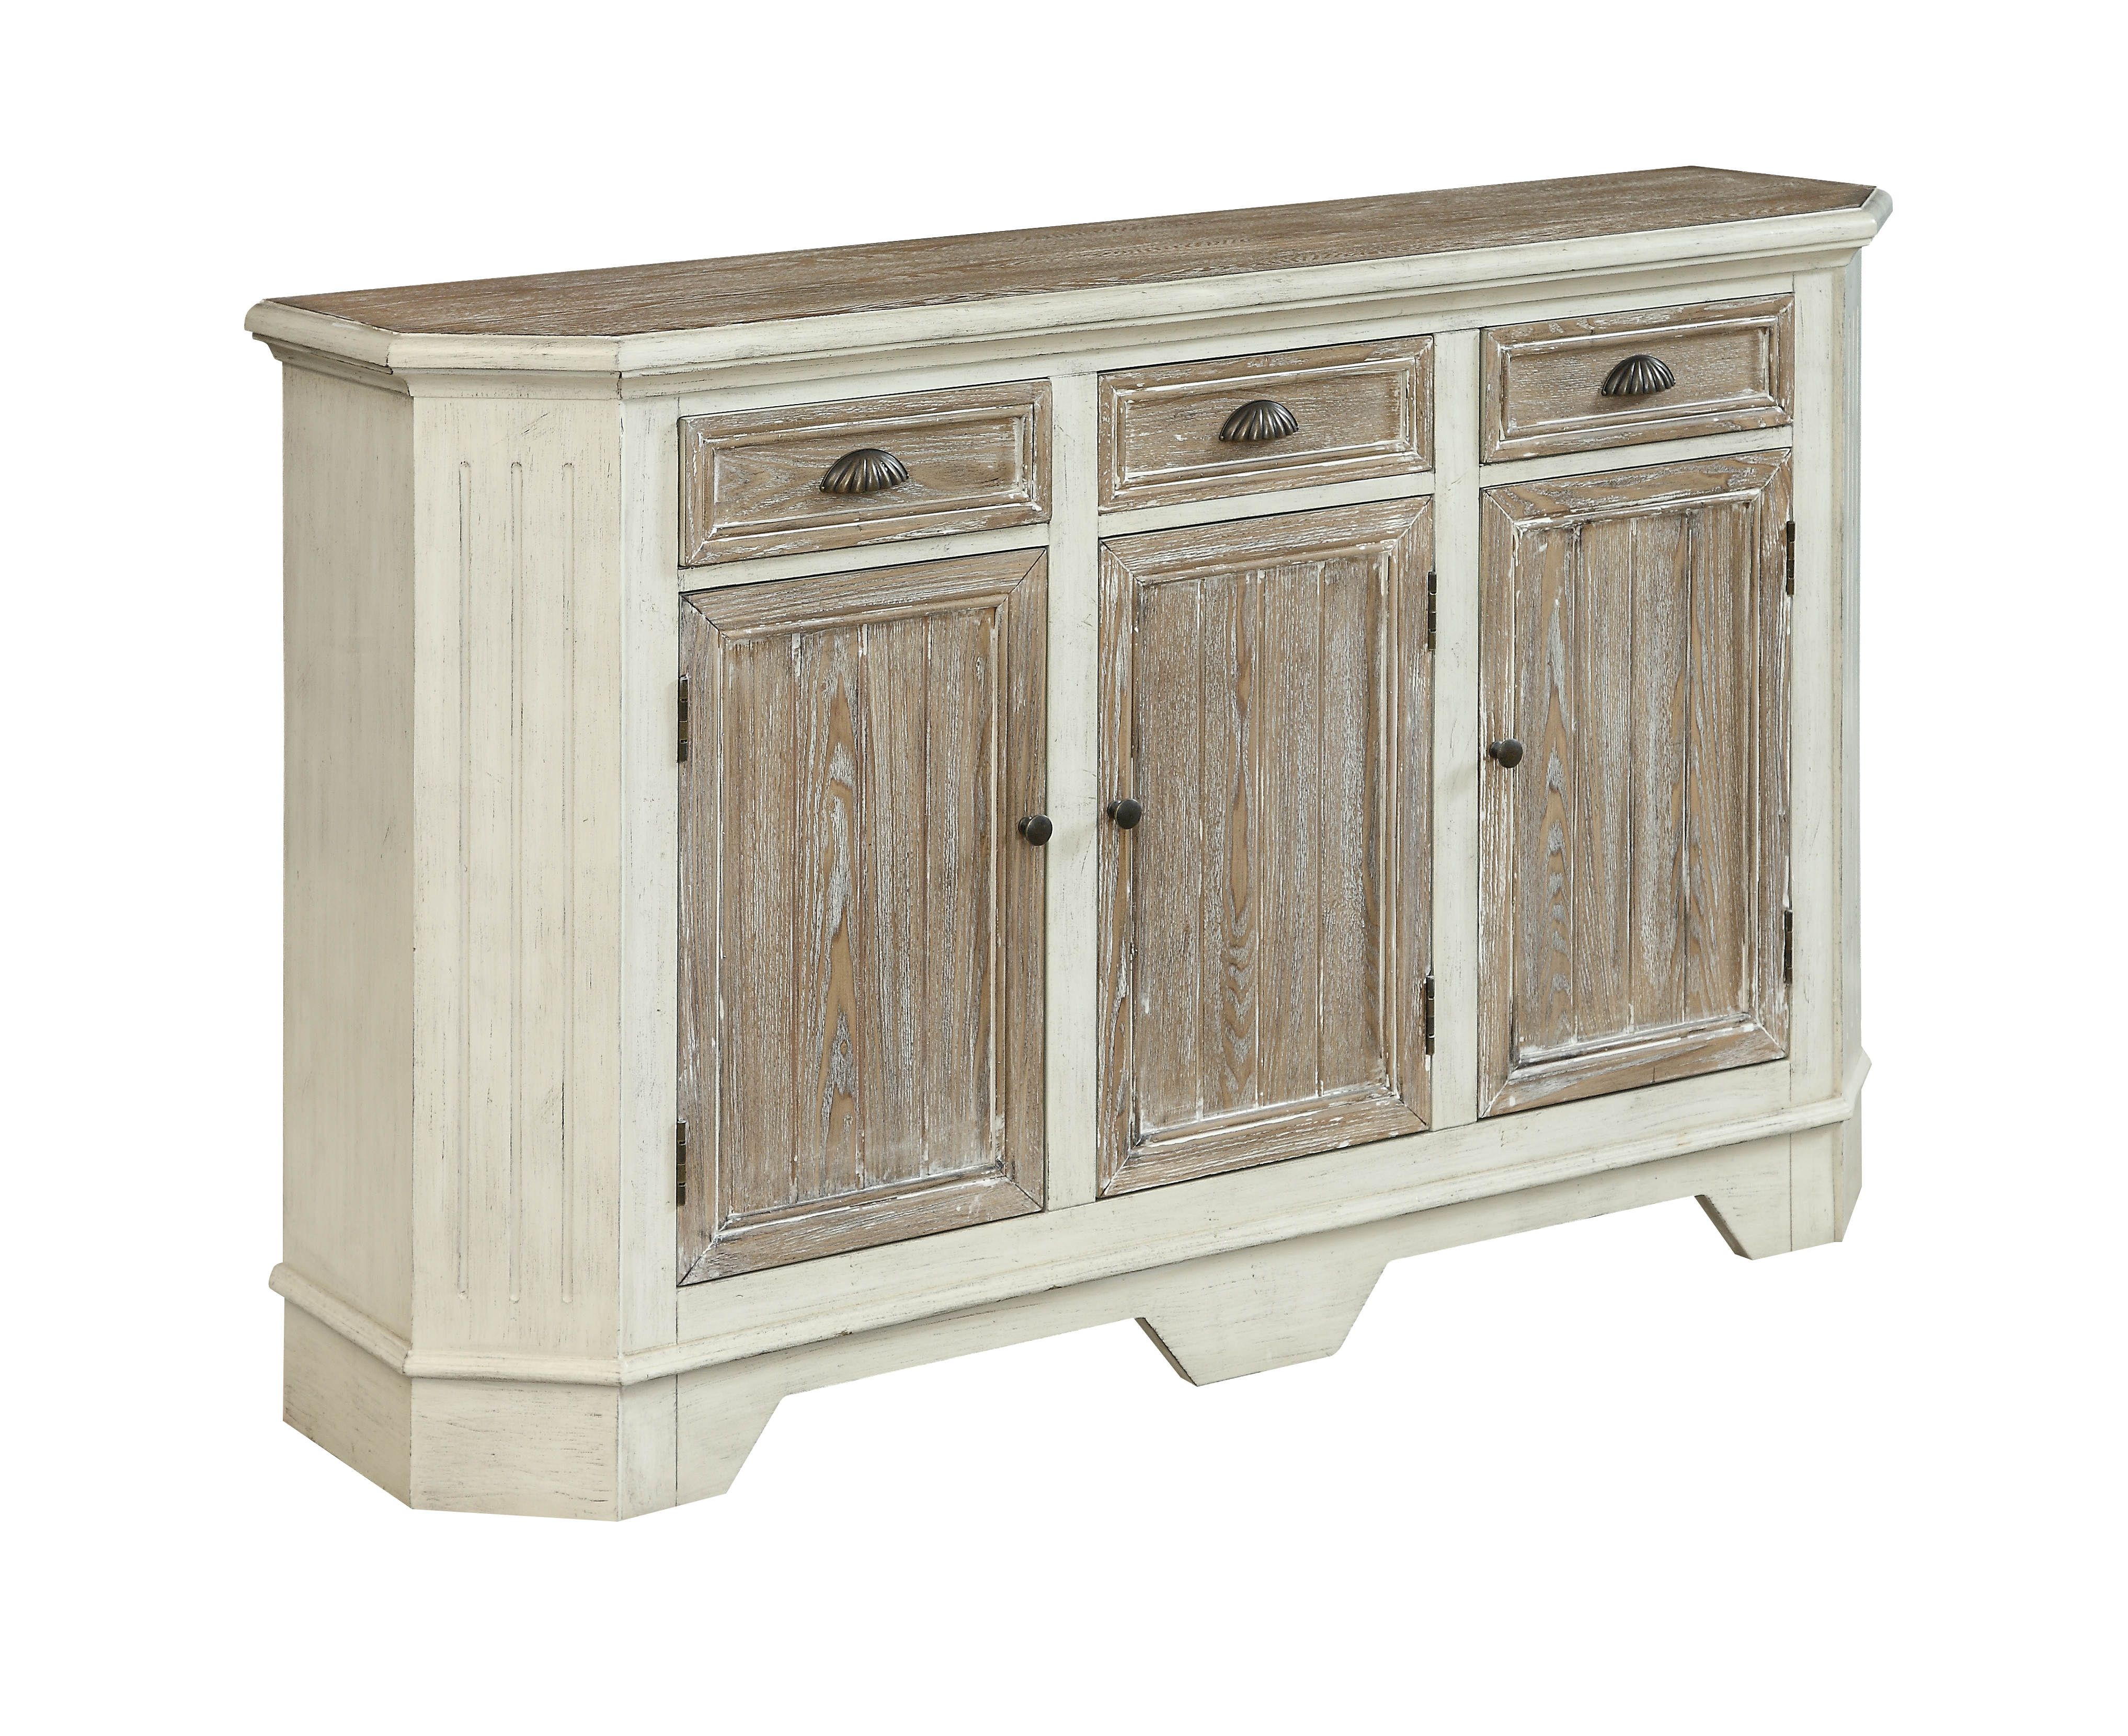 Classy I Winning Home Kitchen Credenza Ideas Wheeland With Regard To Newest Amityville Sideboards (View 14 of 20)